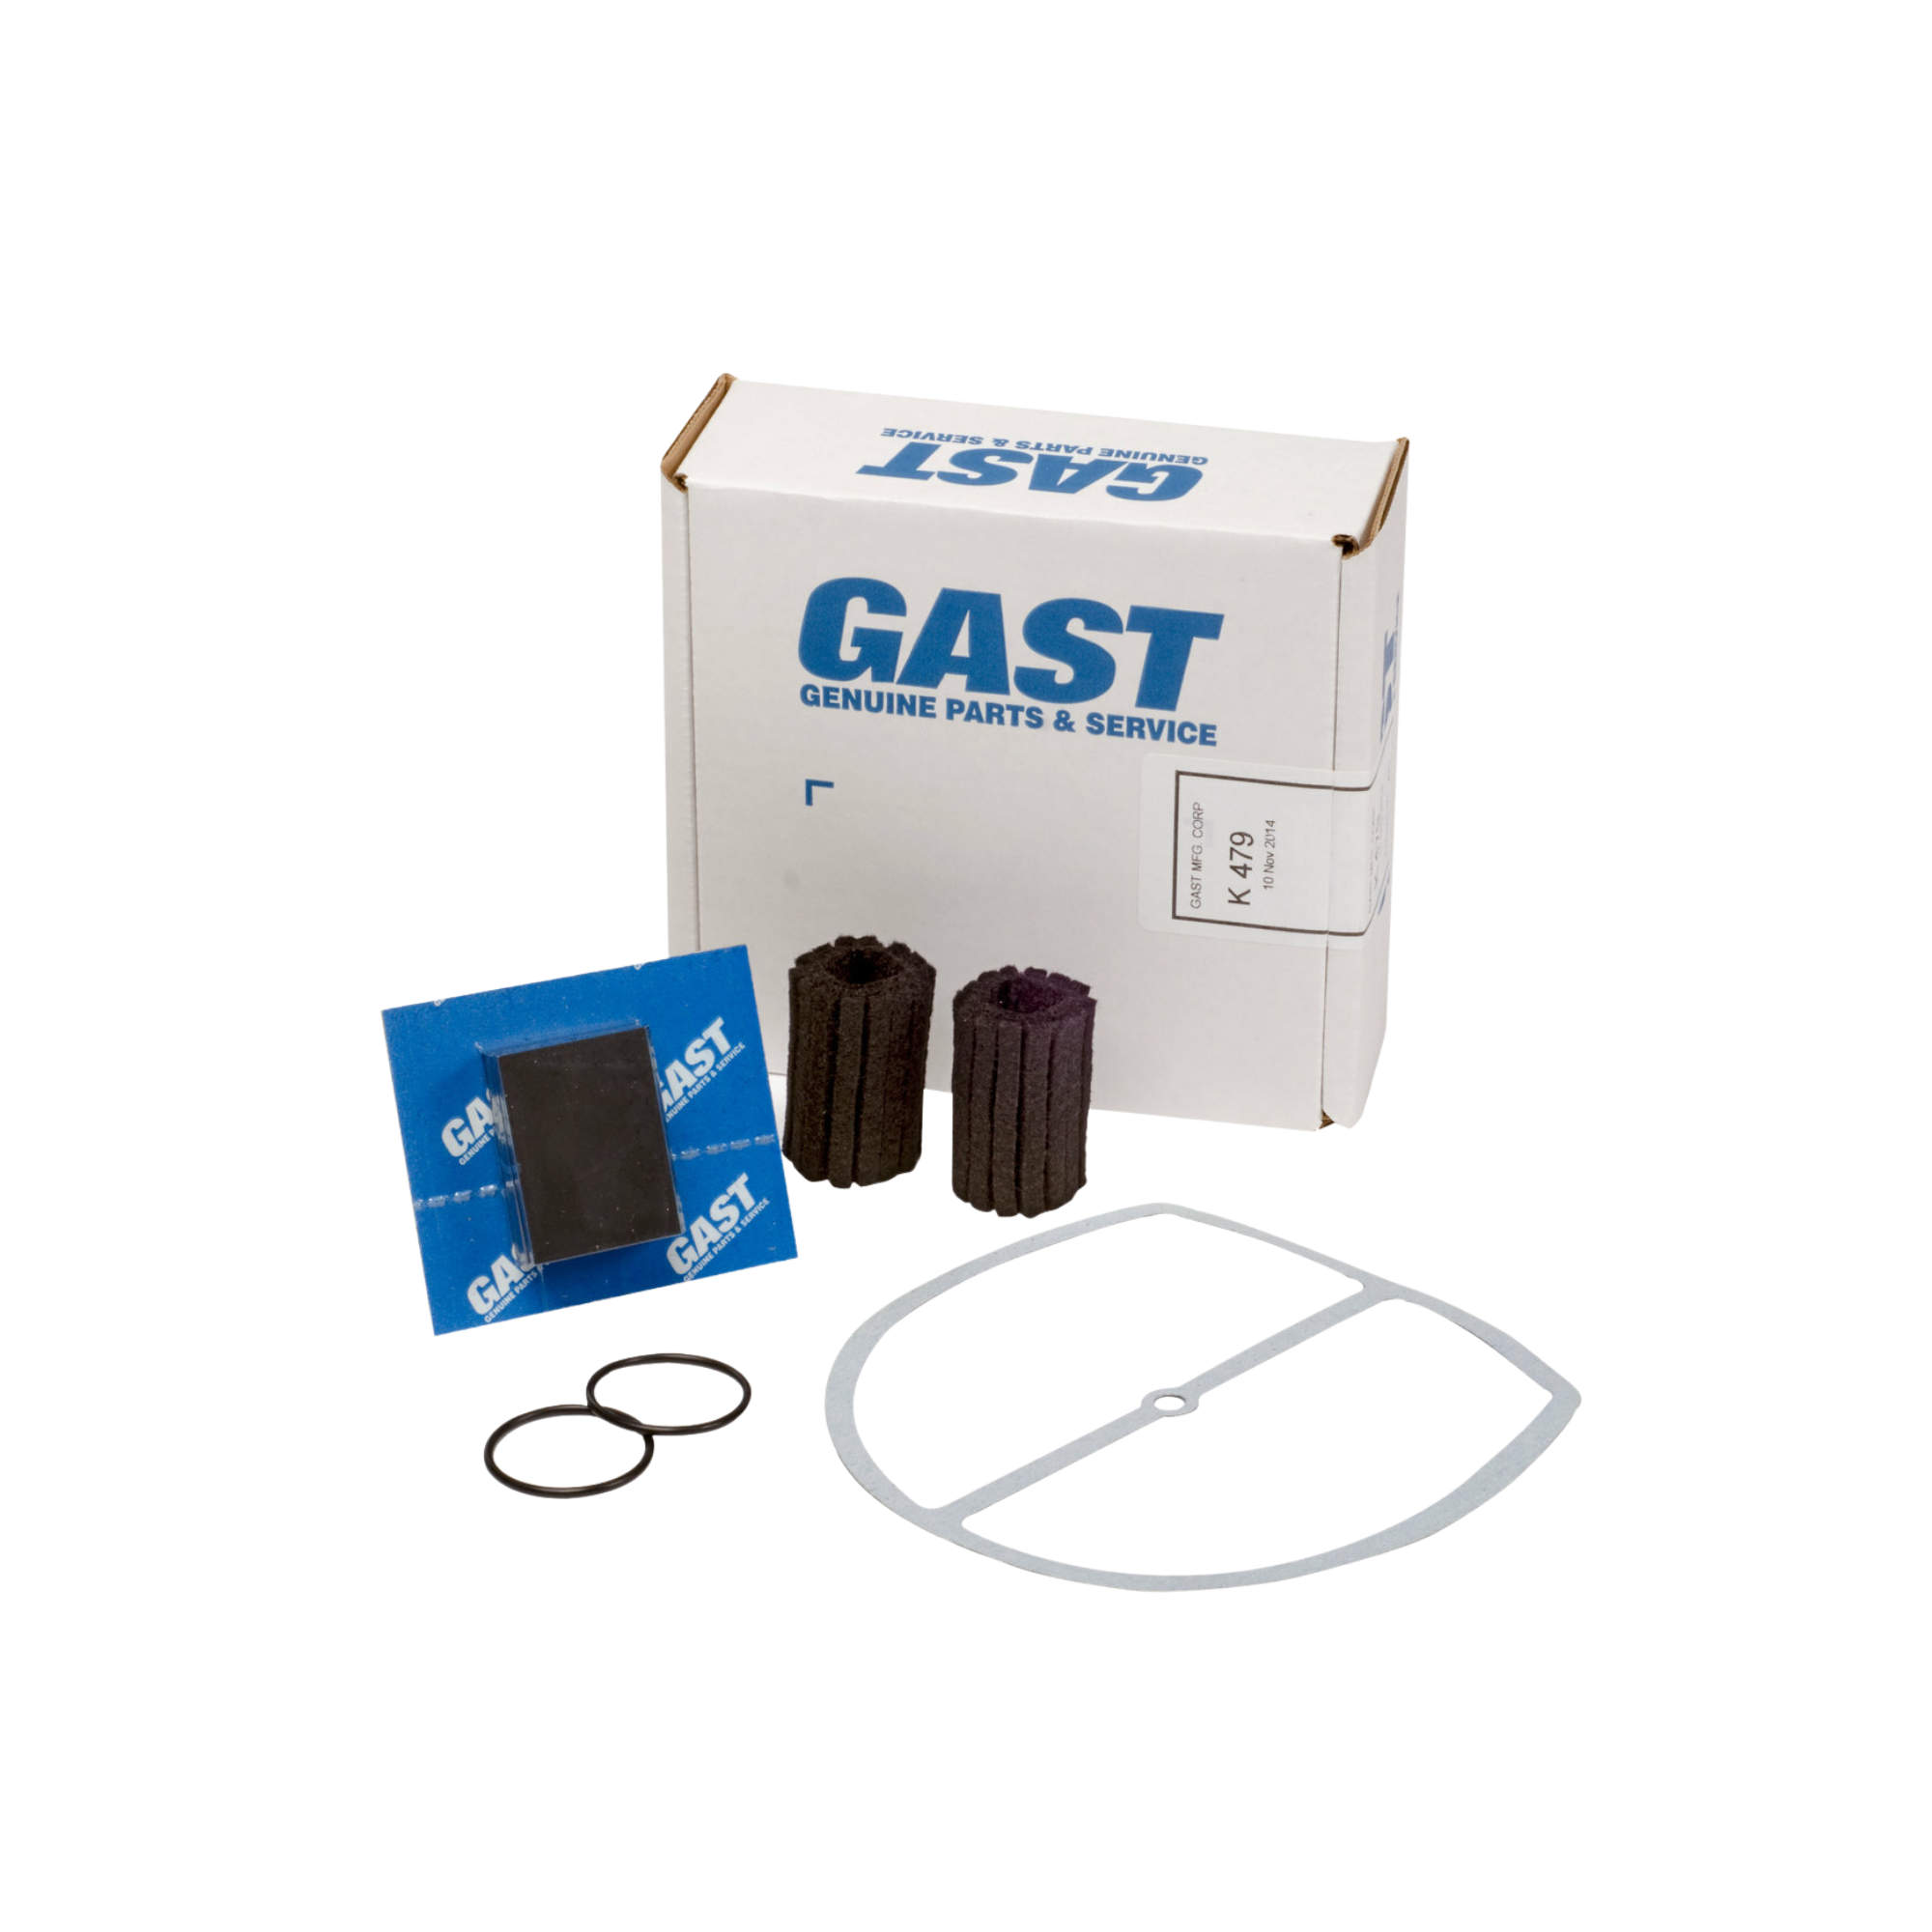 pictured is a repair kit with a gasket, o-rings, felt, filters and a white Gast box